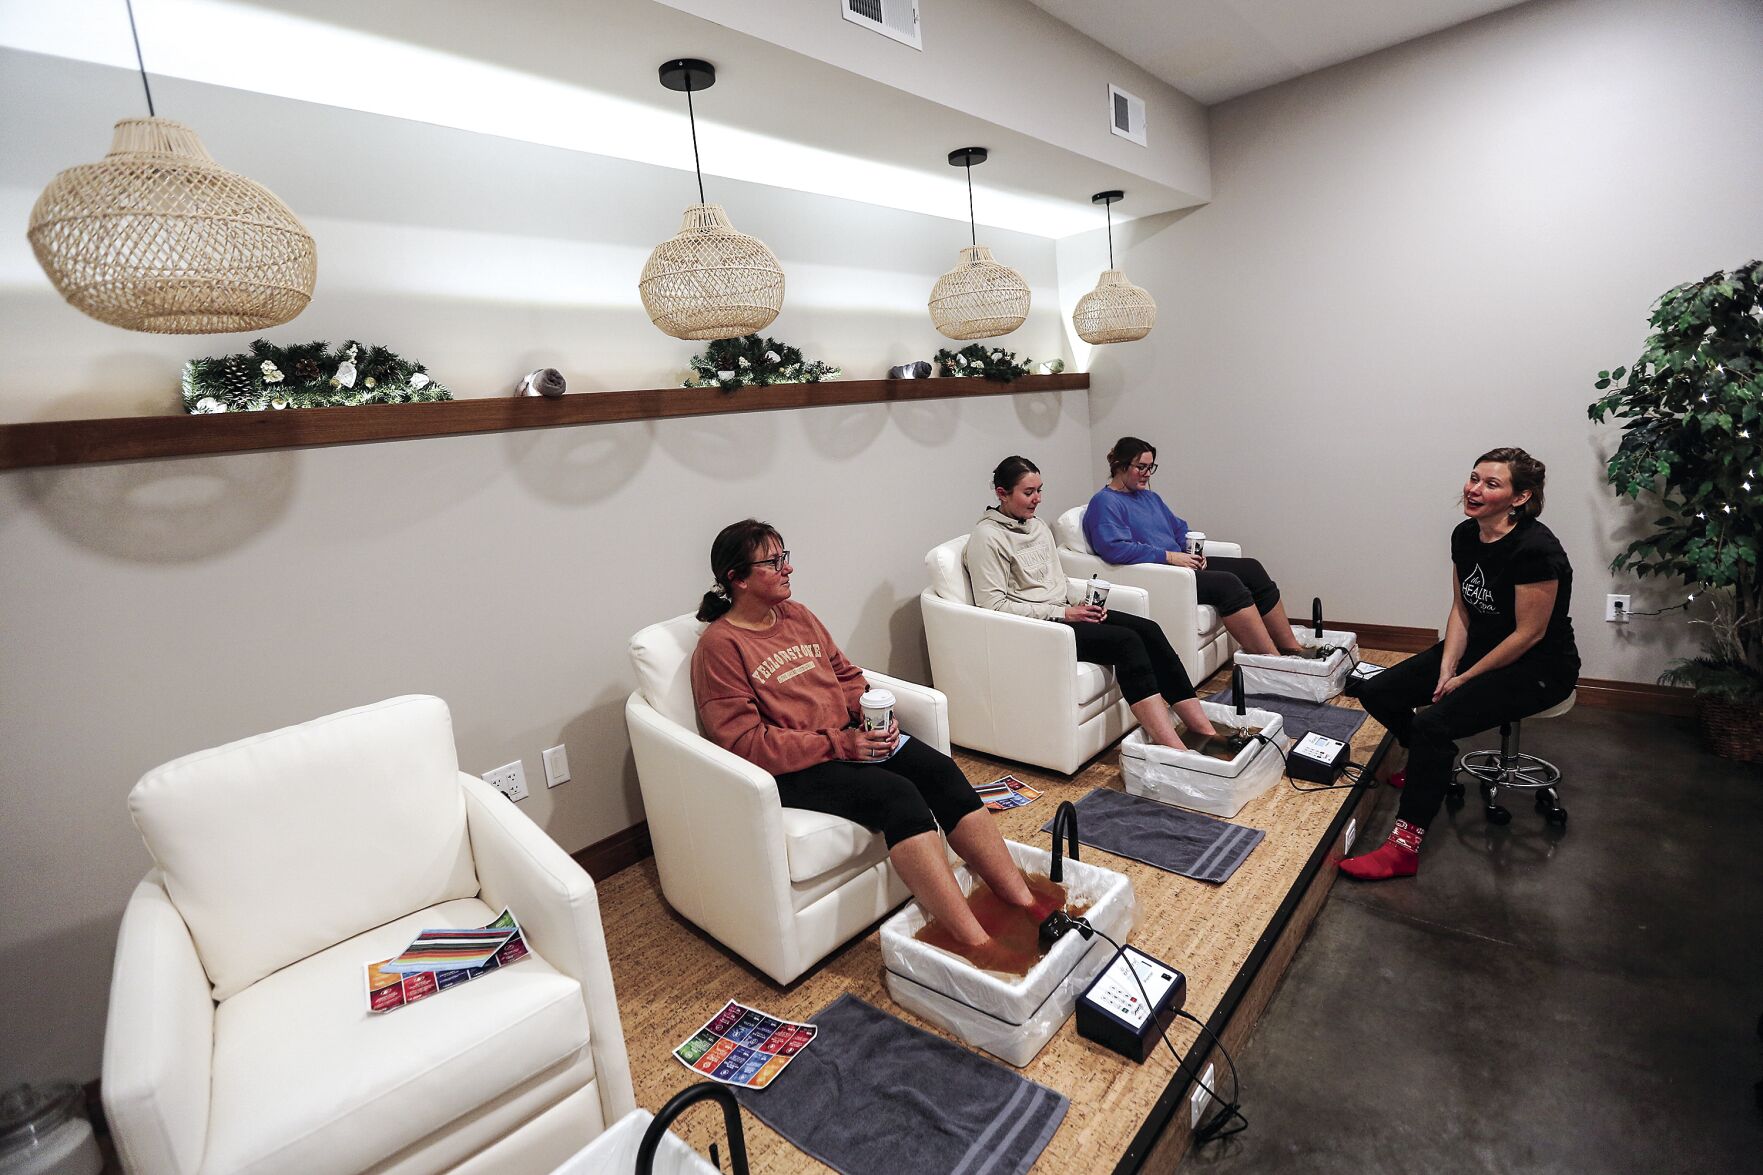 People enjoy a foot detox at The Health Spa by Vive on Friday.    PHOTO CREDIT: Dave Kettering